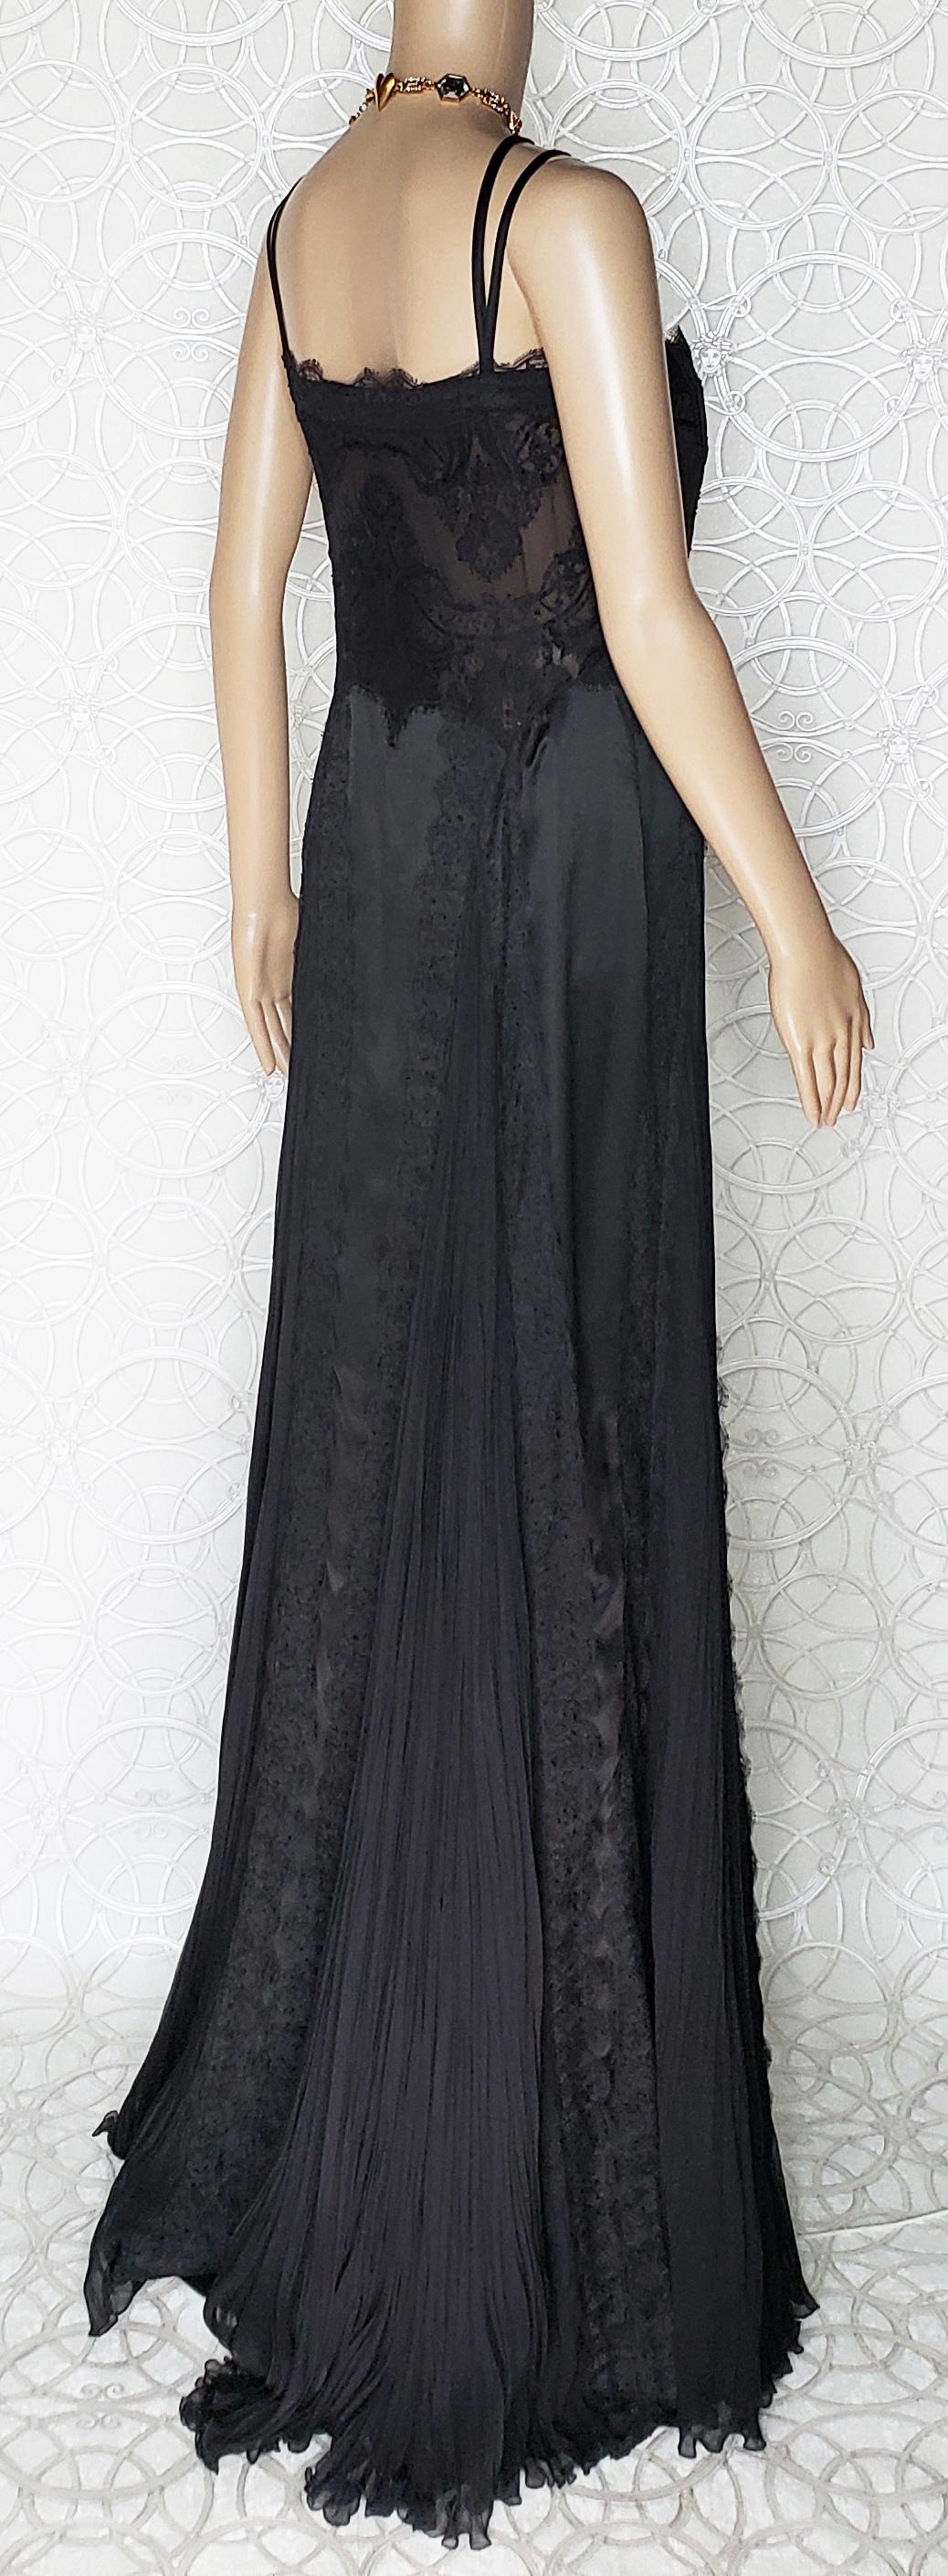 Fall 2003/2004 VINTAGE VERSACE BLACK SILK DRESS GOWN W/SHEER LACE Bodice  For Sale 3